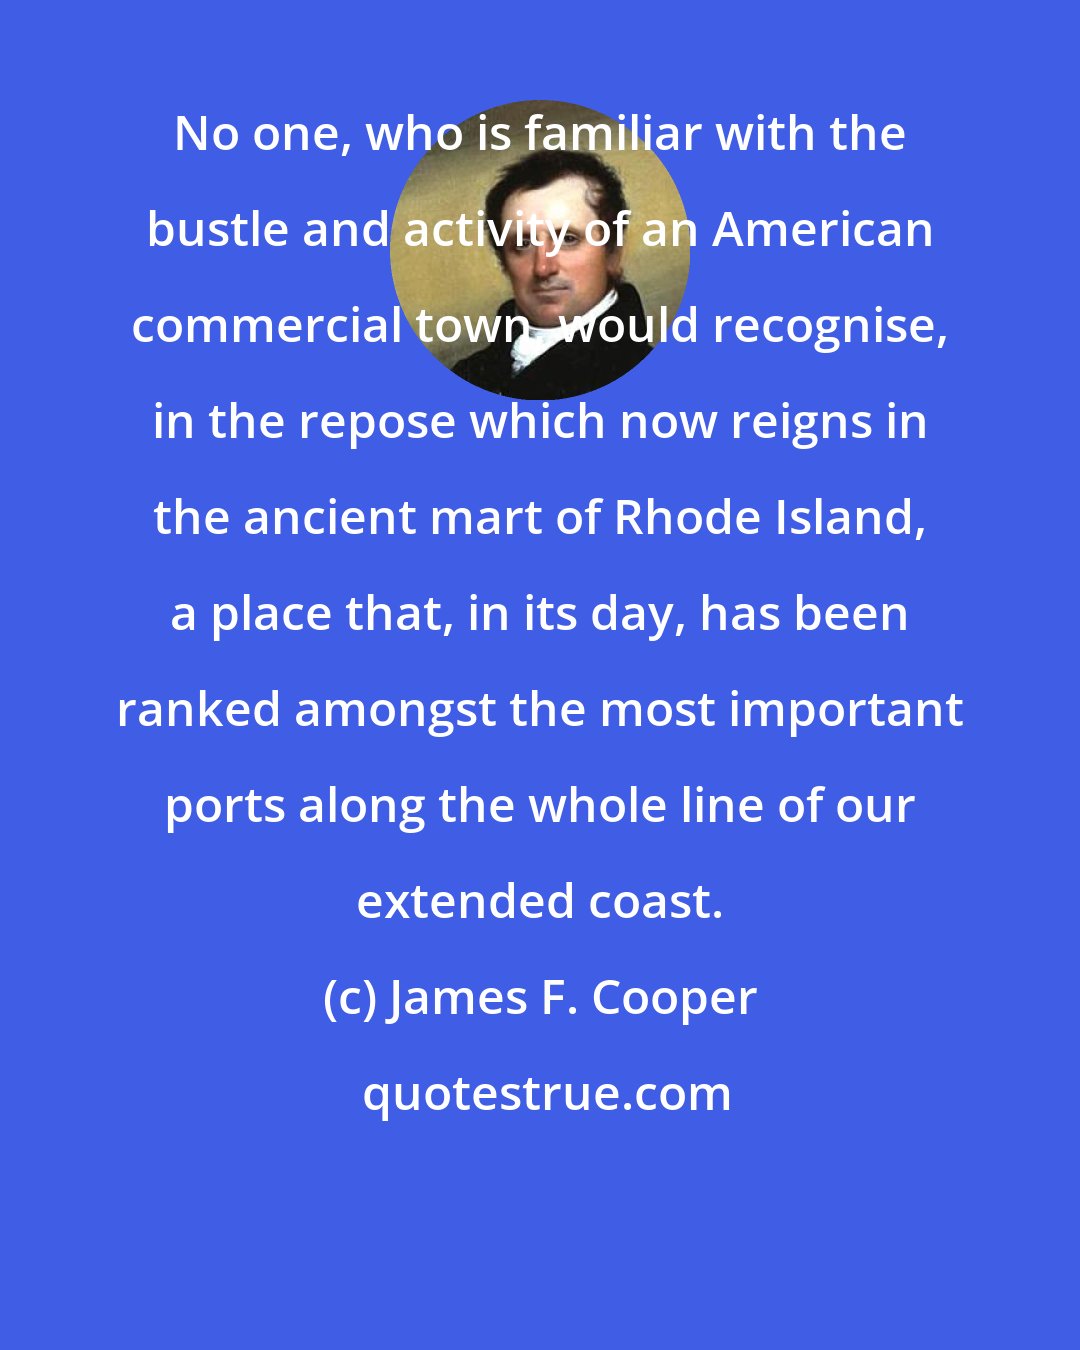 James F. Cooper: No one, who is familiar with the bustle and activity of an American commercial town, would recognise, in the repose which now reigns in the ancient mart of Rhode Island, a place that, in its day, has been ranked amongst the most important ports along the whole line of our extended coast.